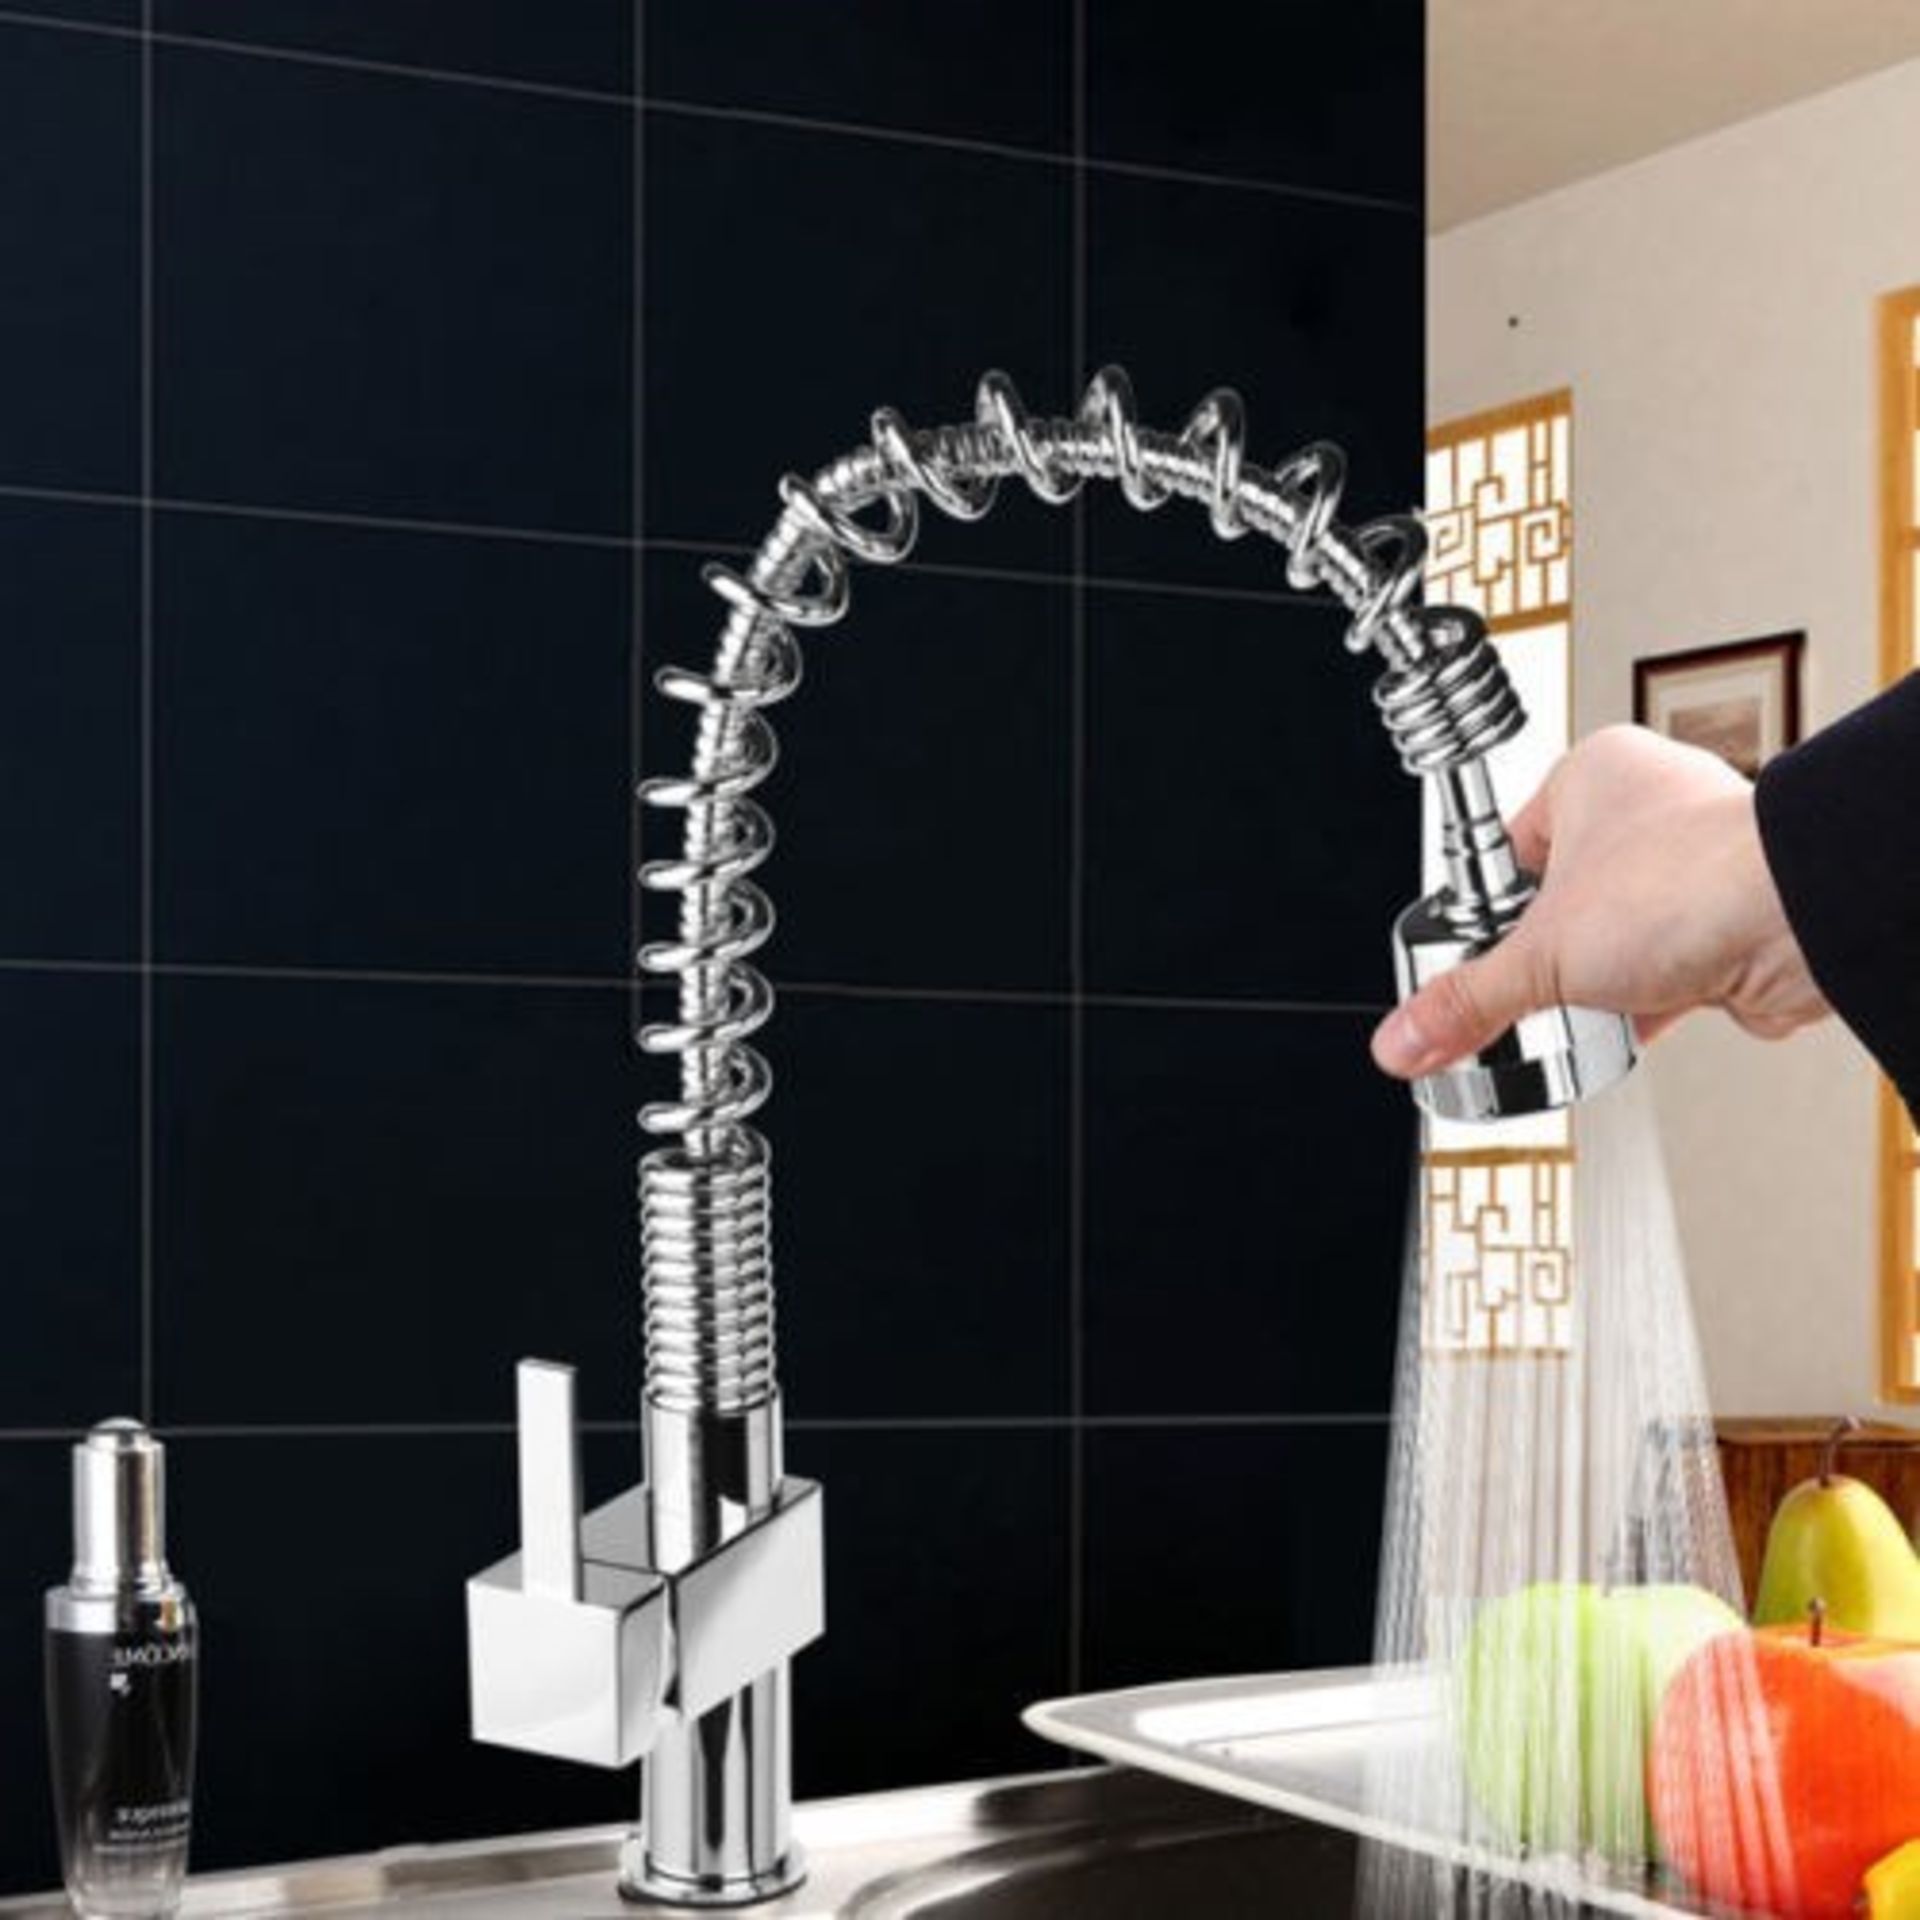 New & Boxed Bentley Modern Monobloc Chrome Brass Pull Out Spray Mixer Tap.Rrp £349.99.This Tap...